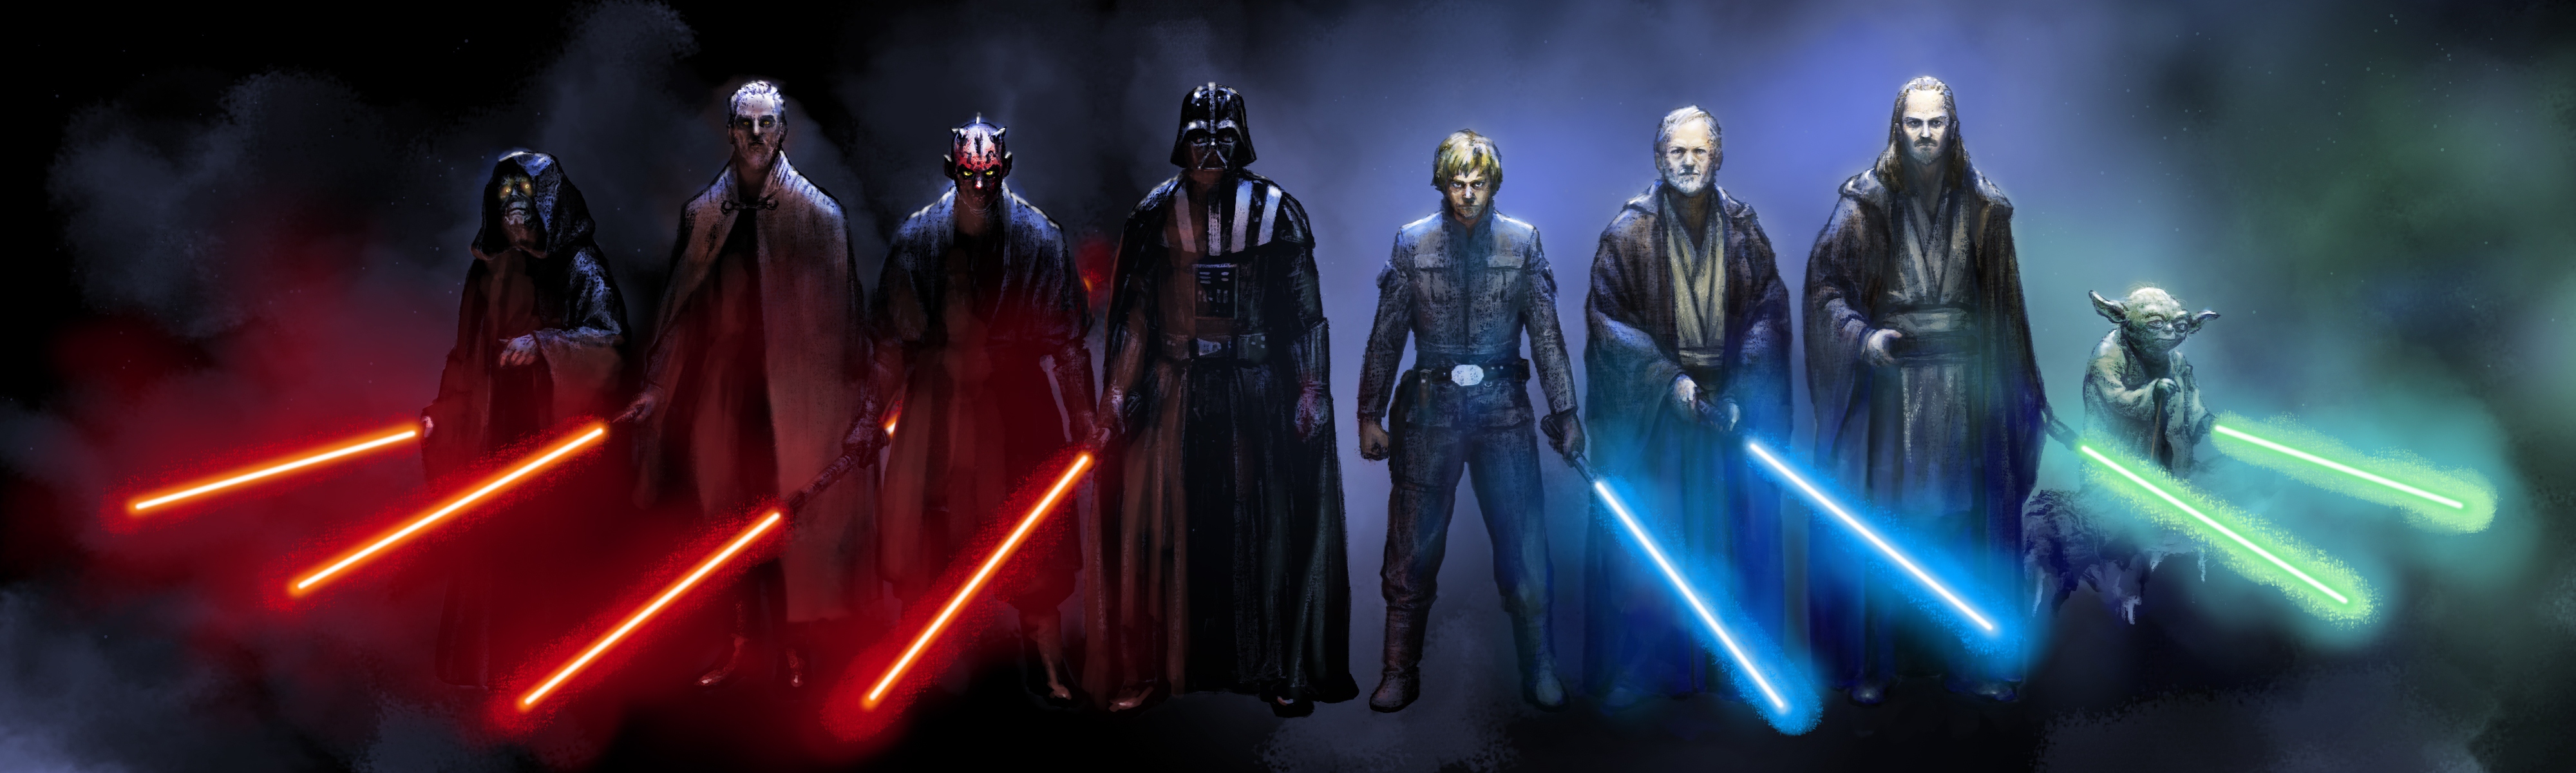 Wallpaper, 4000x1200 px, entertainment, fi, fiction, games, Jedi, lightsabers, movies, sci, science, star, video, wars, weapons 4000x1200